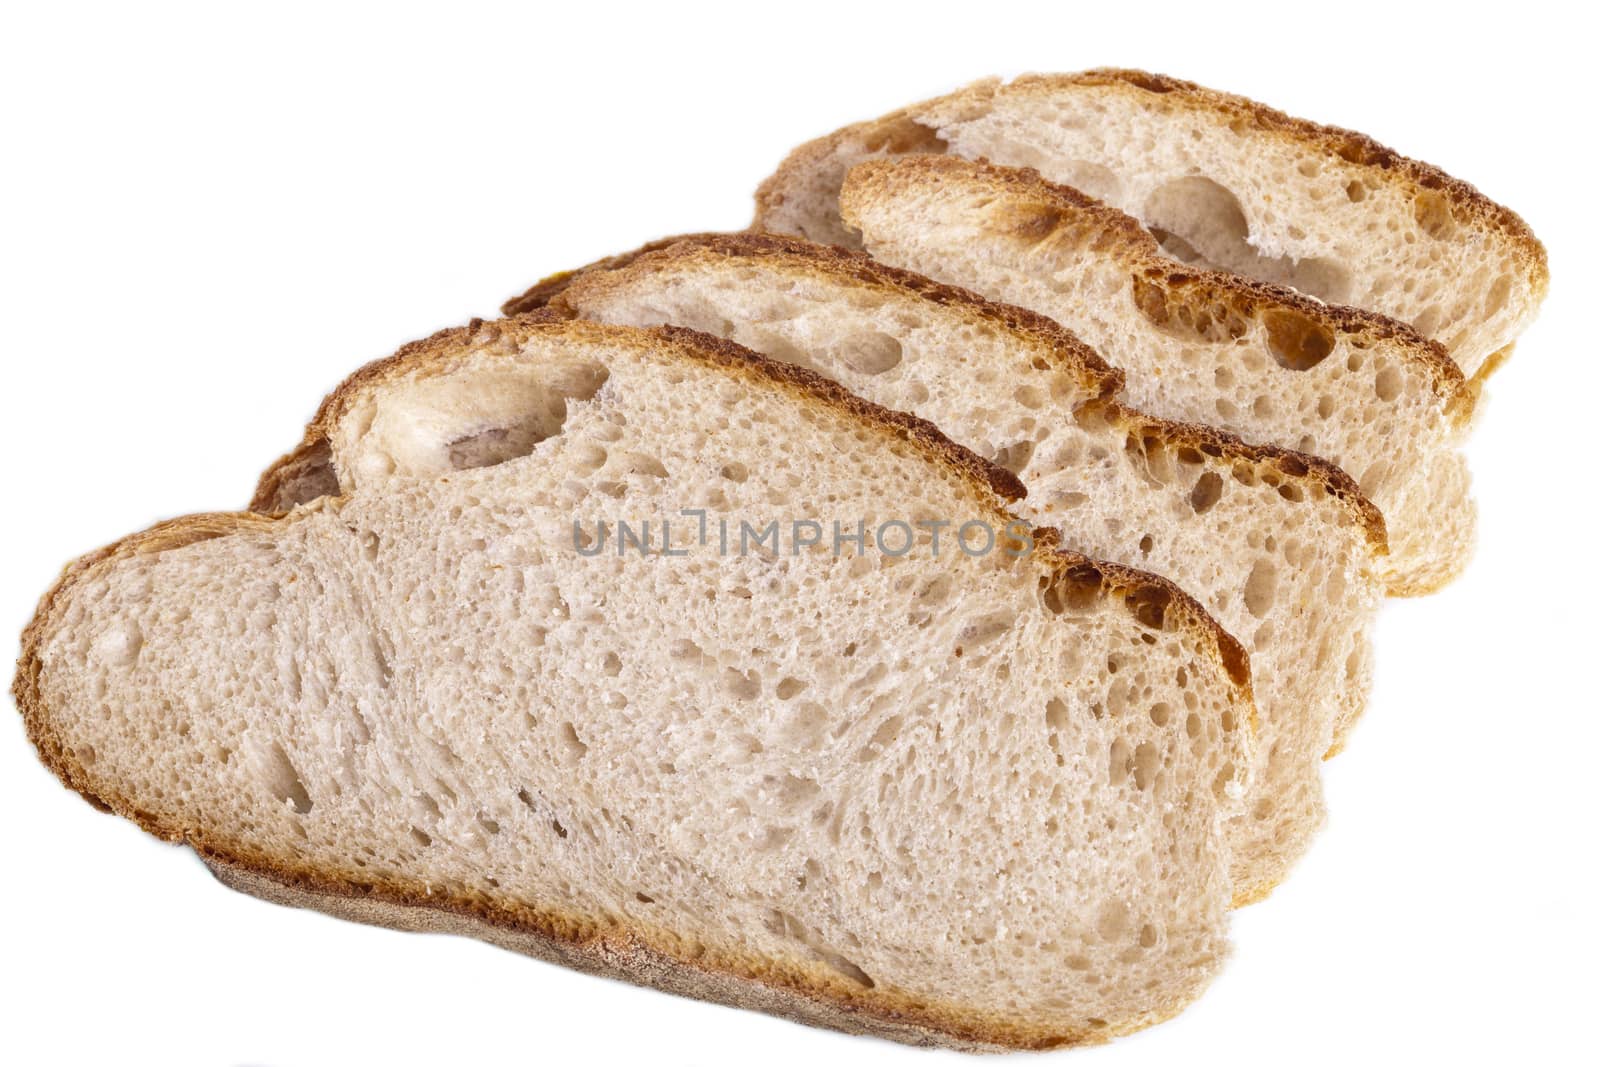 tasty fresh baked bread bun baguette natural food isolated on white background